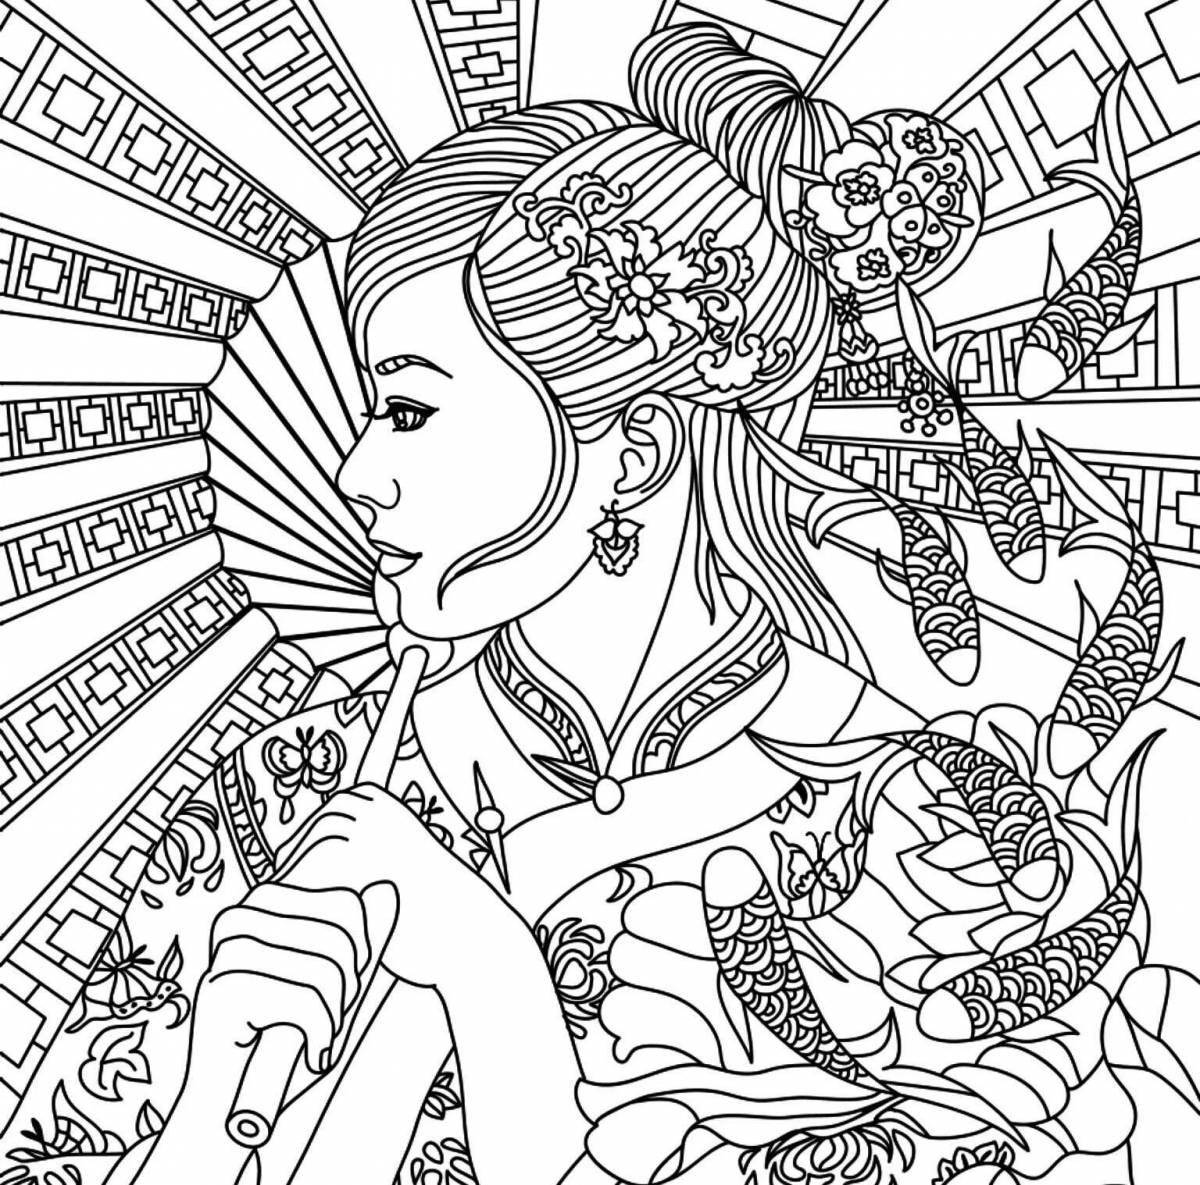 Great anti-stress coloring book for adults 18